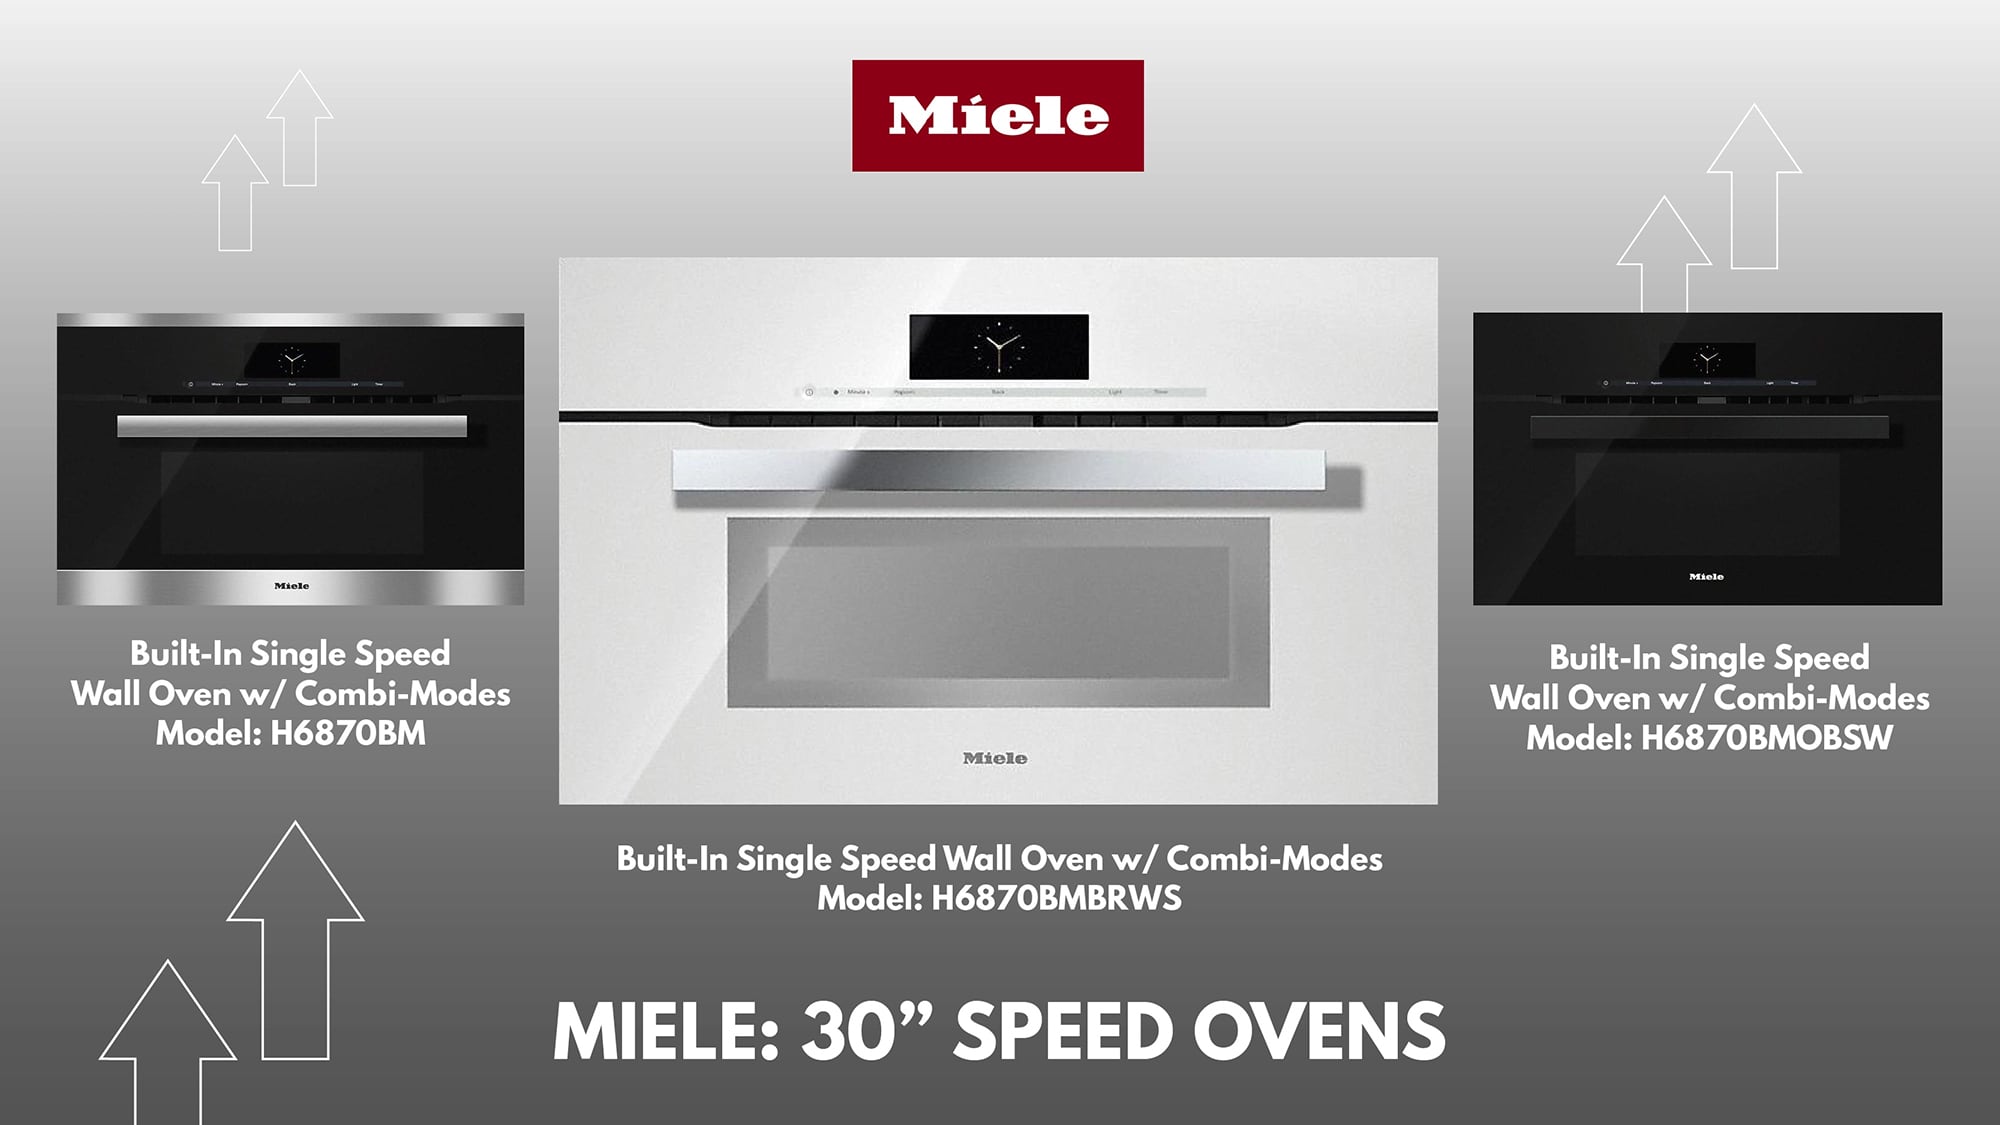 https://d12mivgeuoigbq.cloudfront.net/magento-media/members/b0026-fuse/blog-speed_ovens-miele-1.jpg